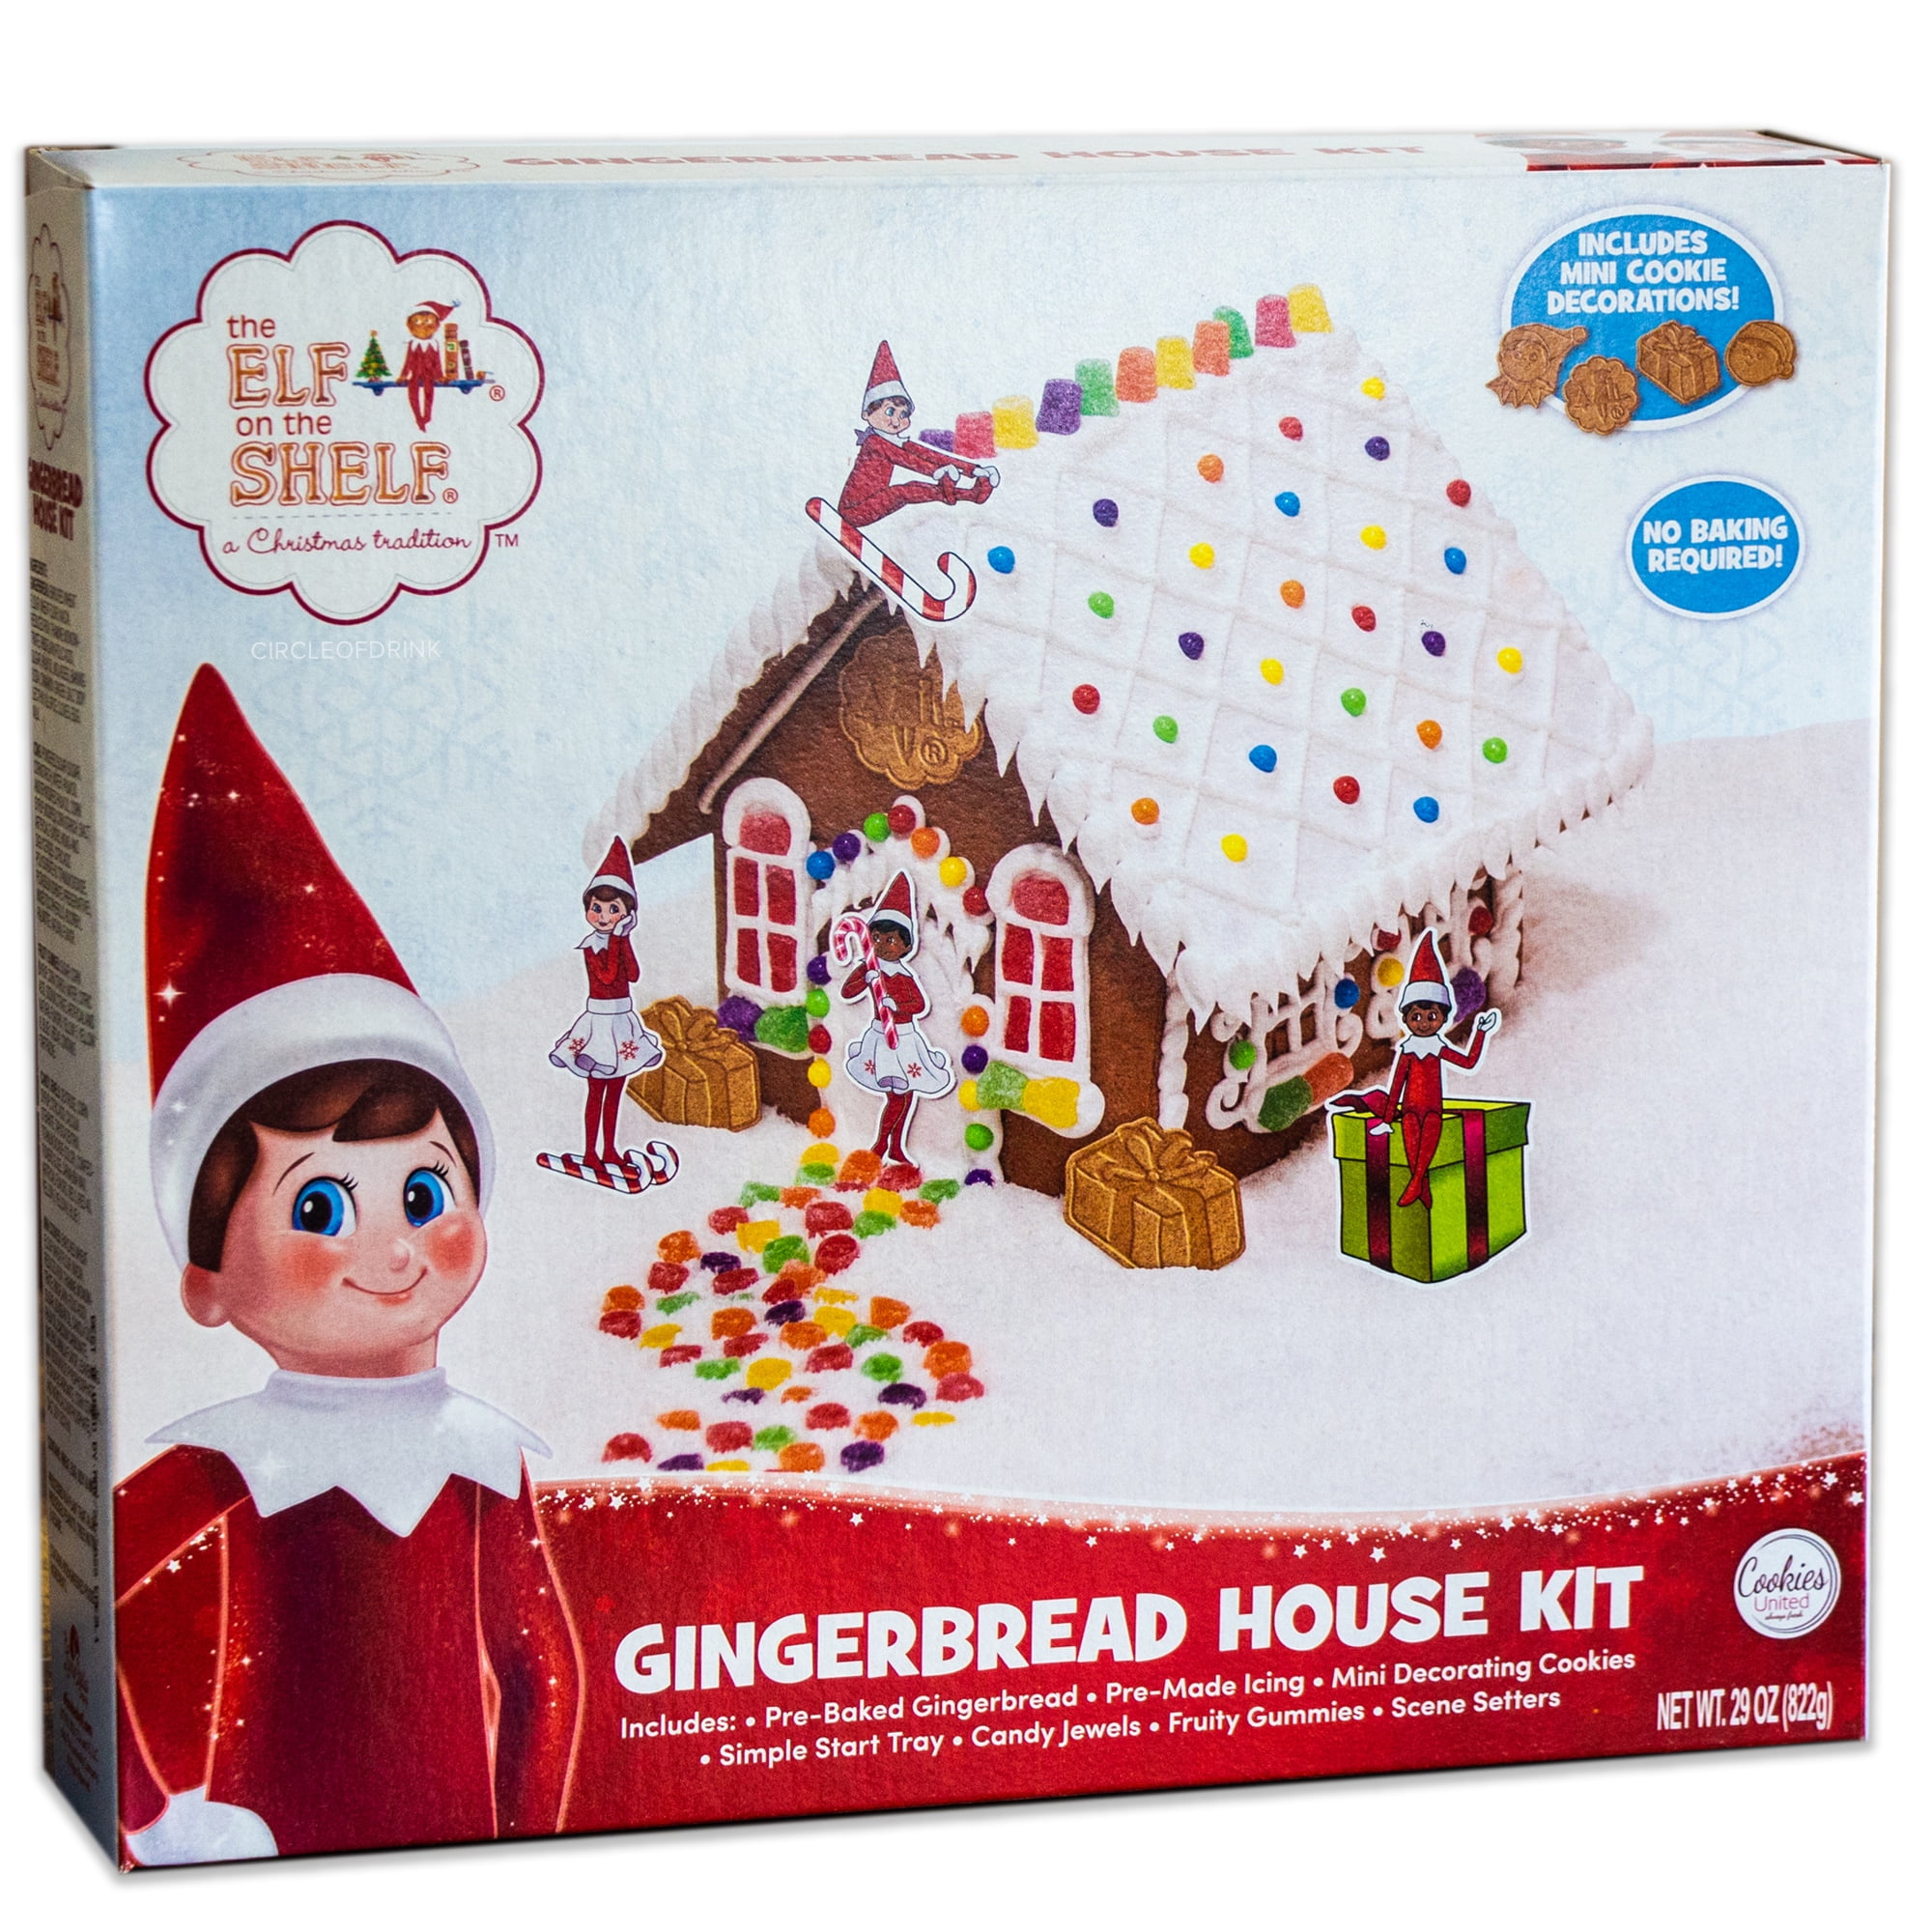 Elf Holiday Gingerbread House Kit - Everything Included - 29oz, 822g ...